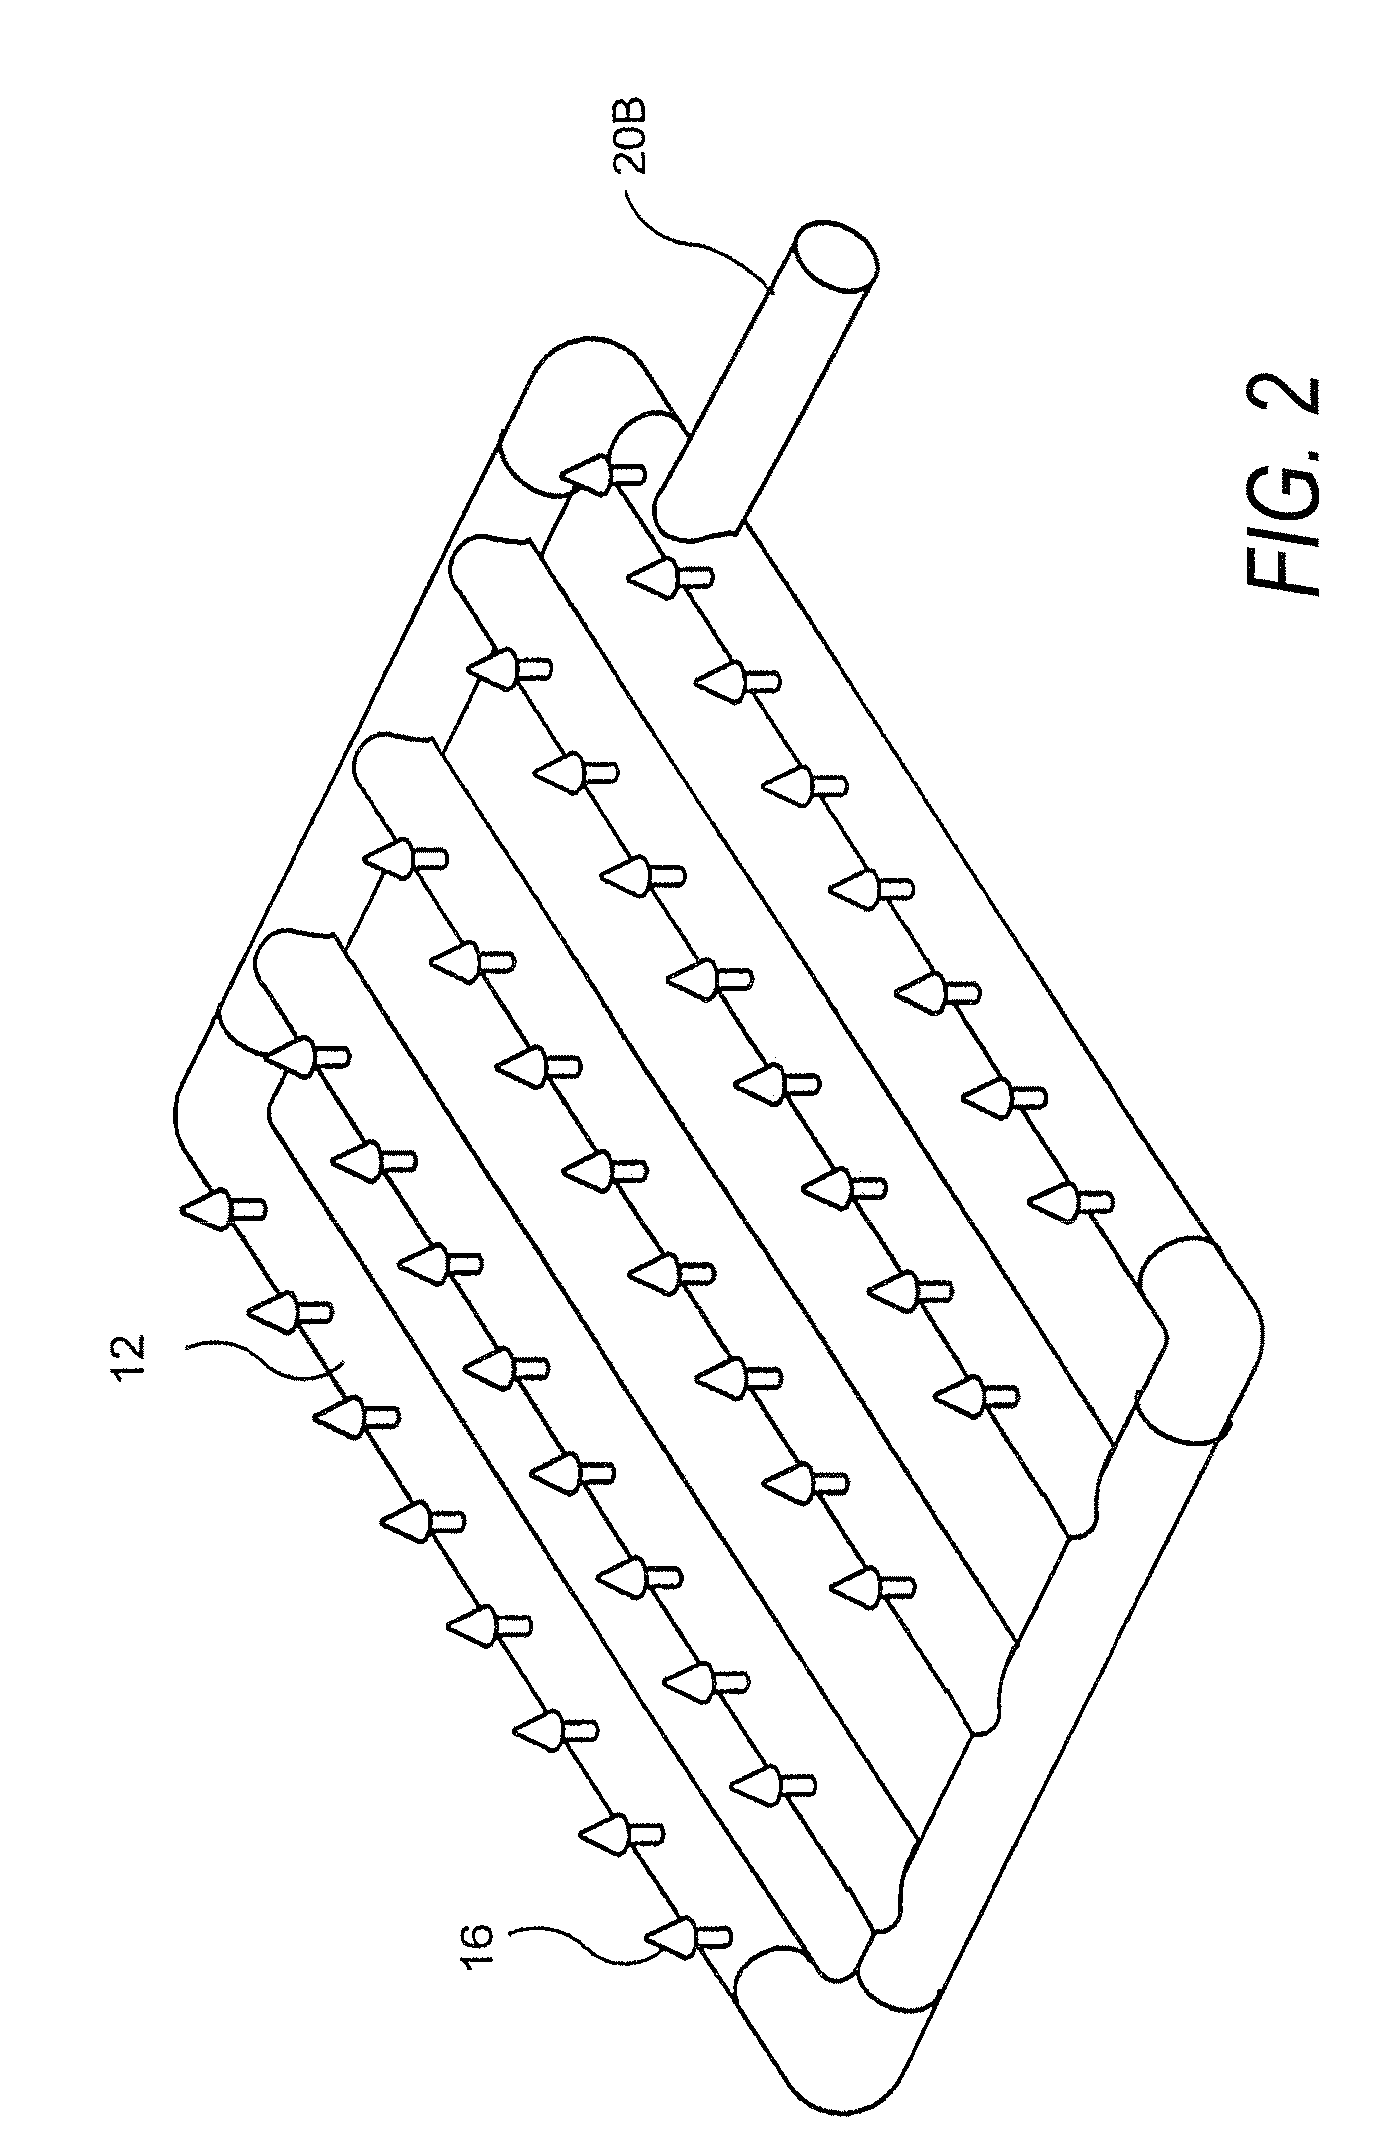 Fluidized bed technology for security enhancement